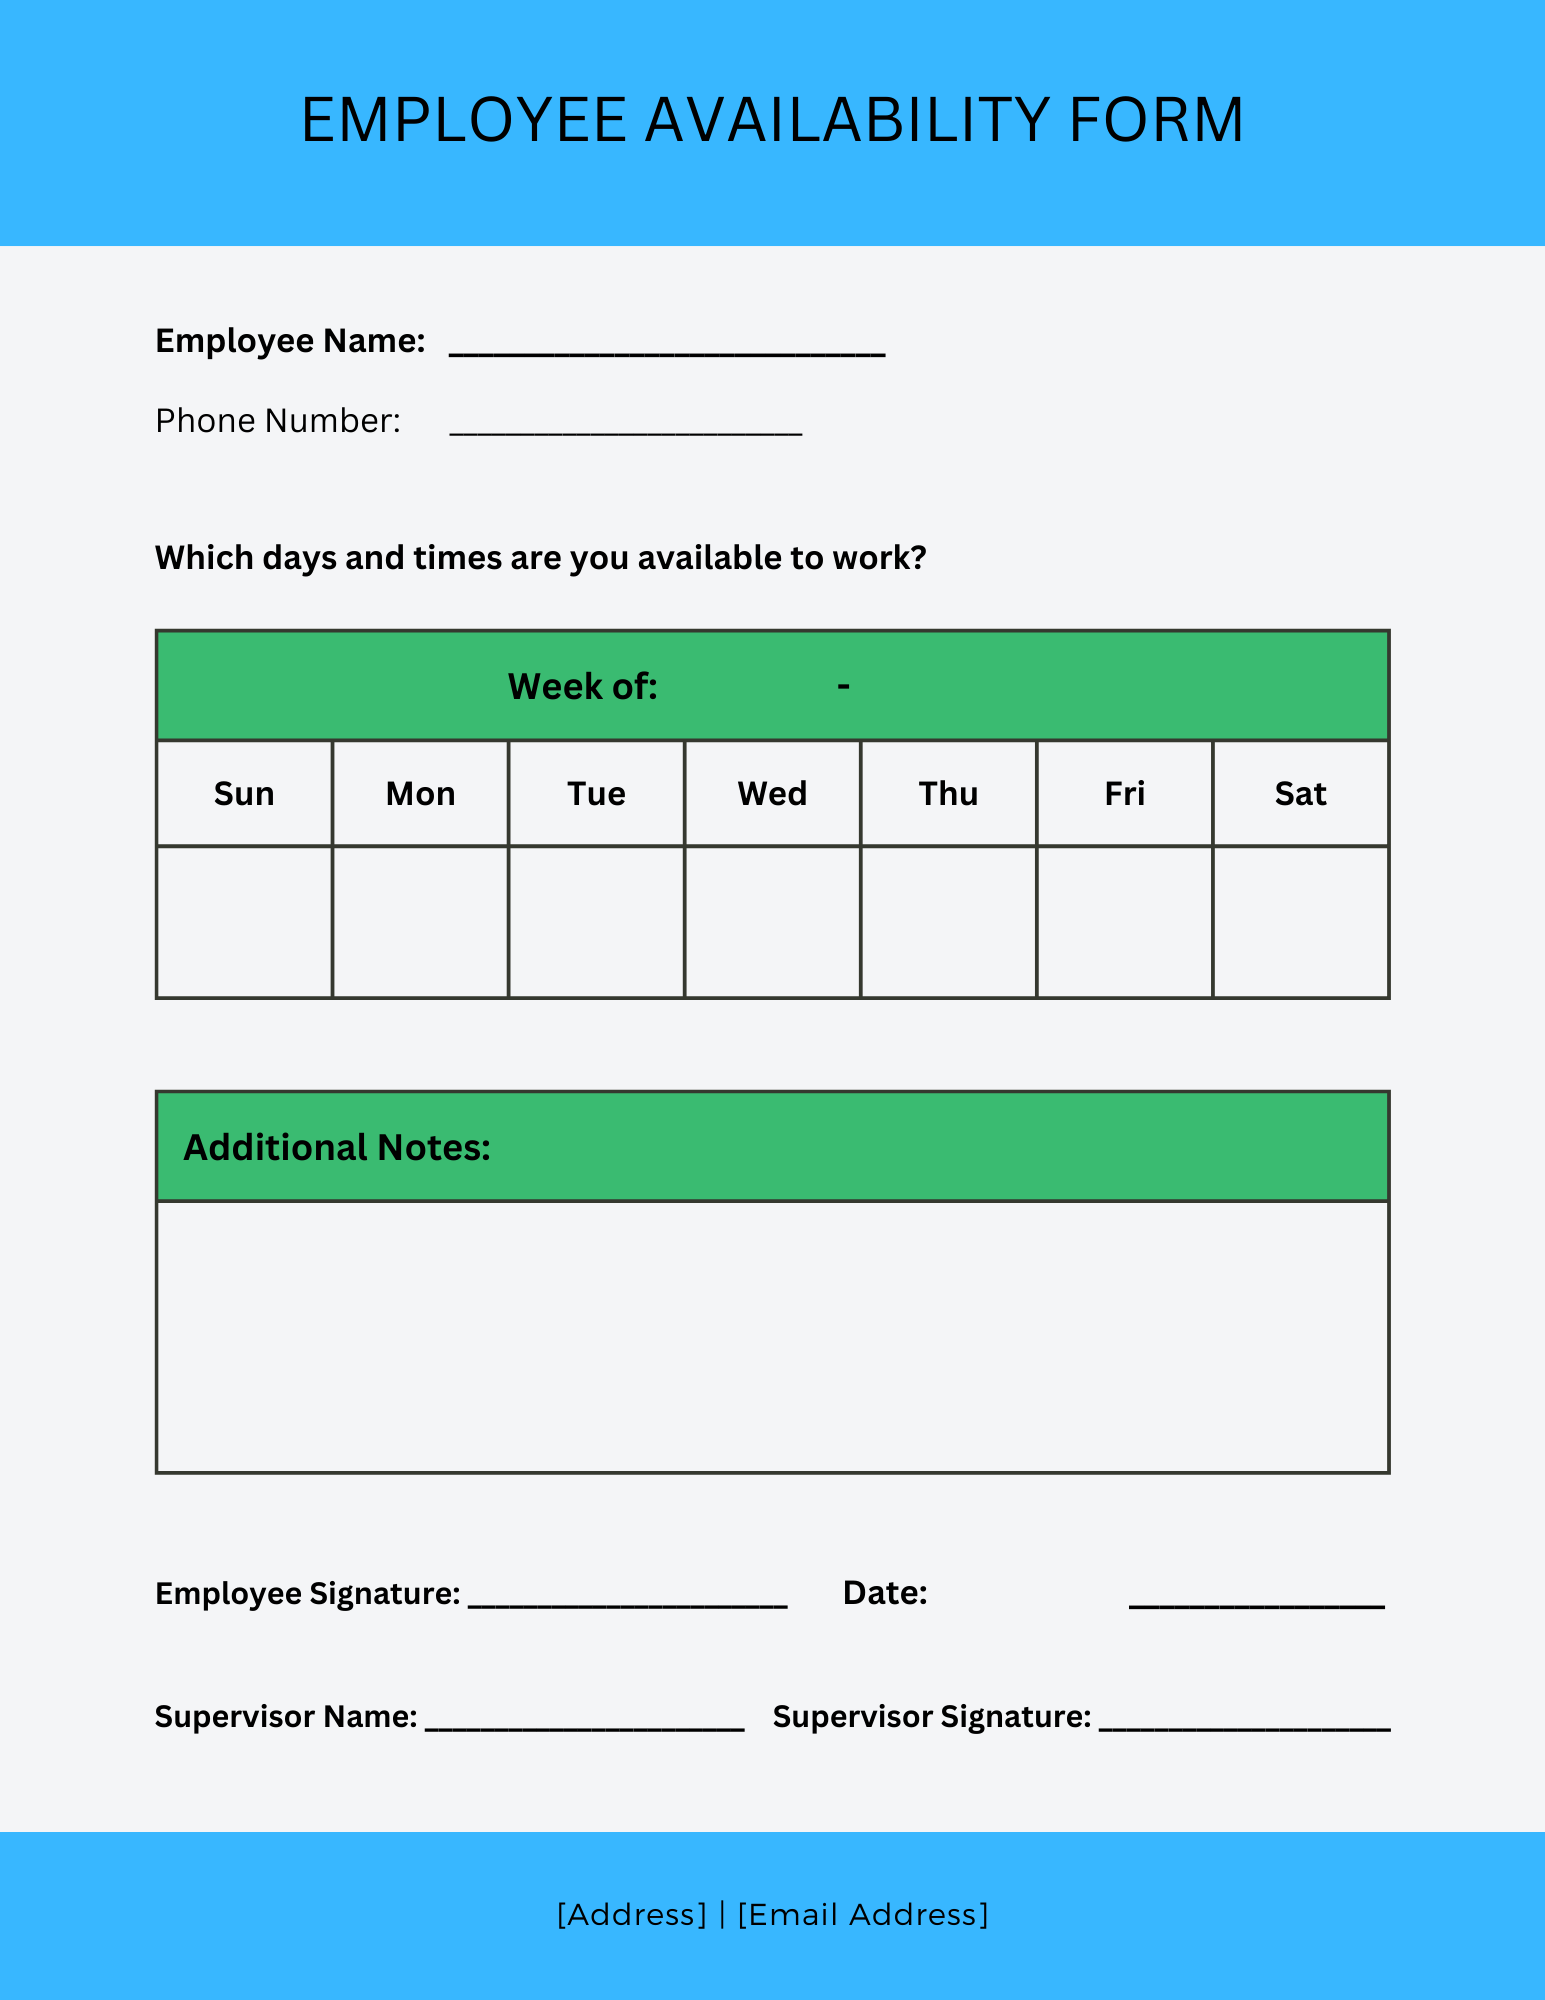 employee-availability-form-template-buildremote